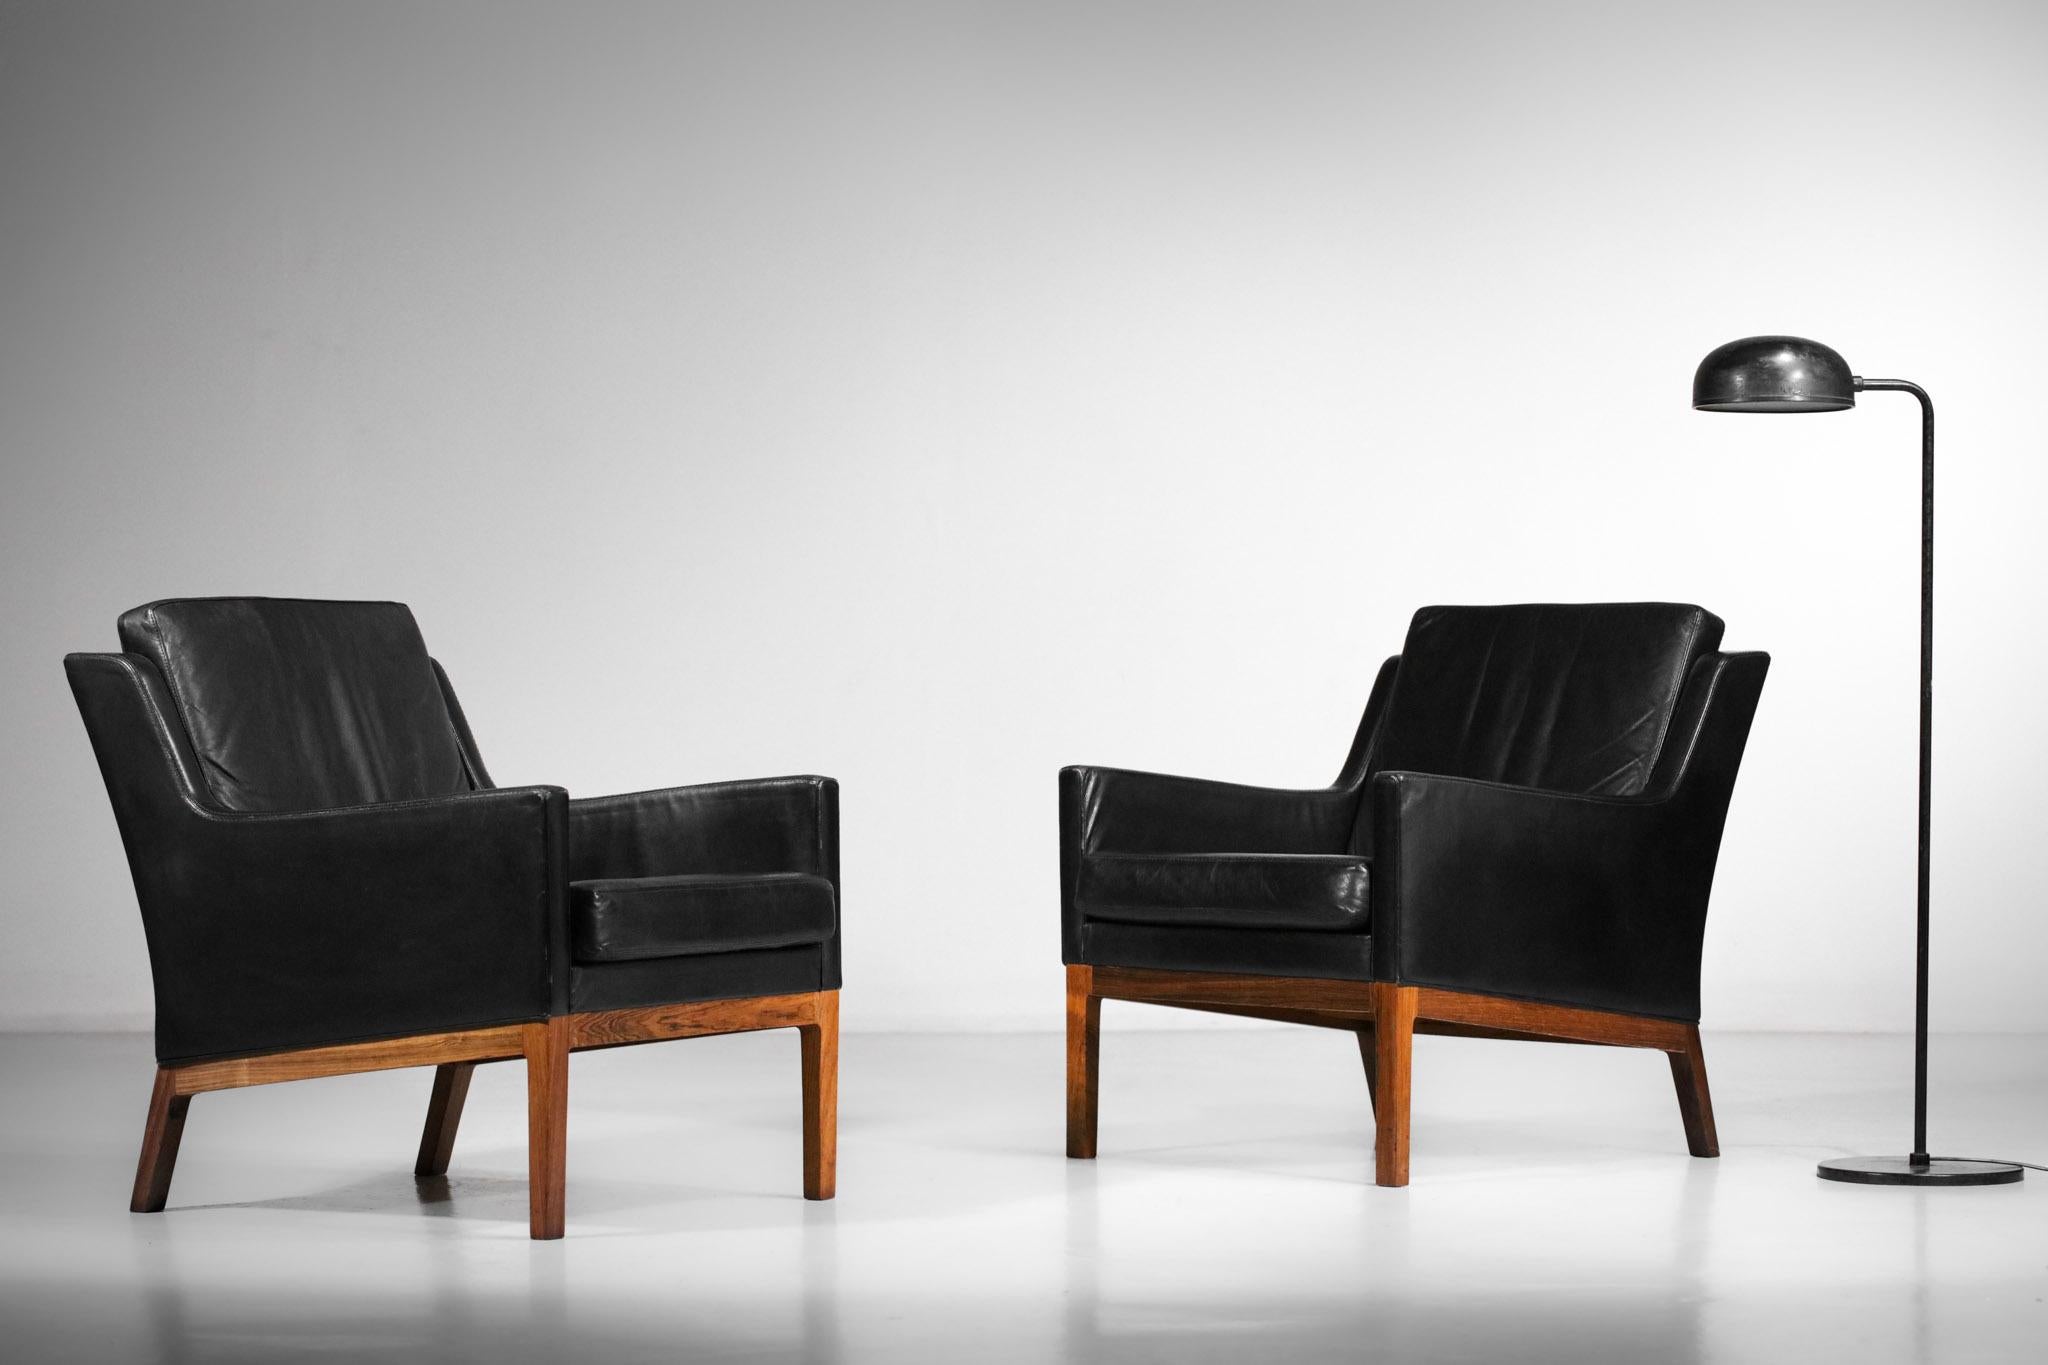 Pair of Scandinavian armchairs by Danish designer Kai Lyngfeldt-Larsen from the 60s. Structure in solid rosewood, seats and backs in black leather. Very nice pair of armchairs with sober and pure lines typical of the Scandinavian design of the time.